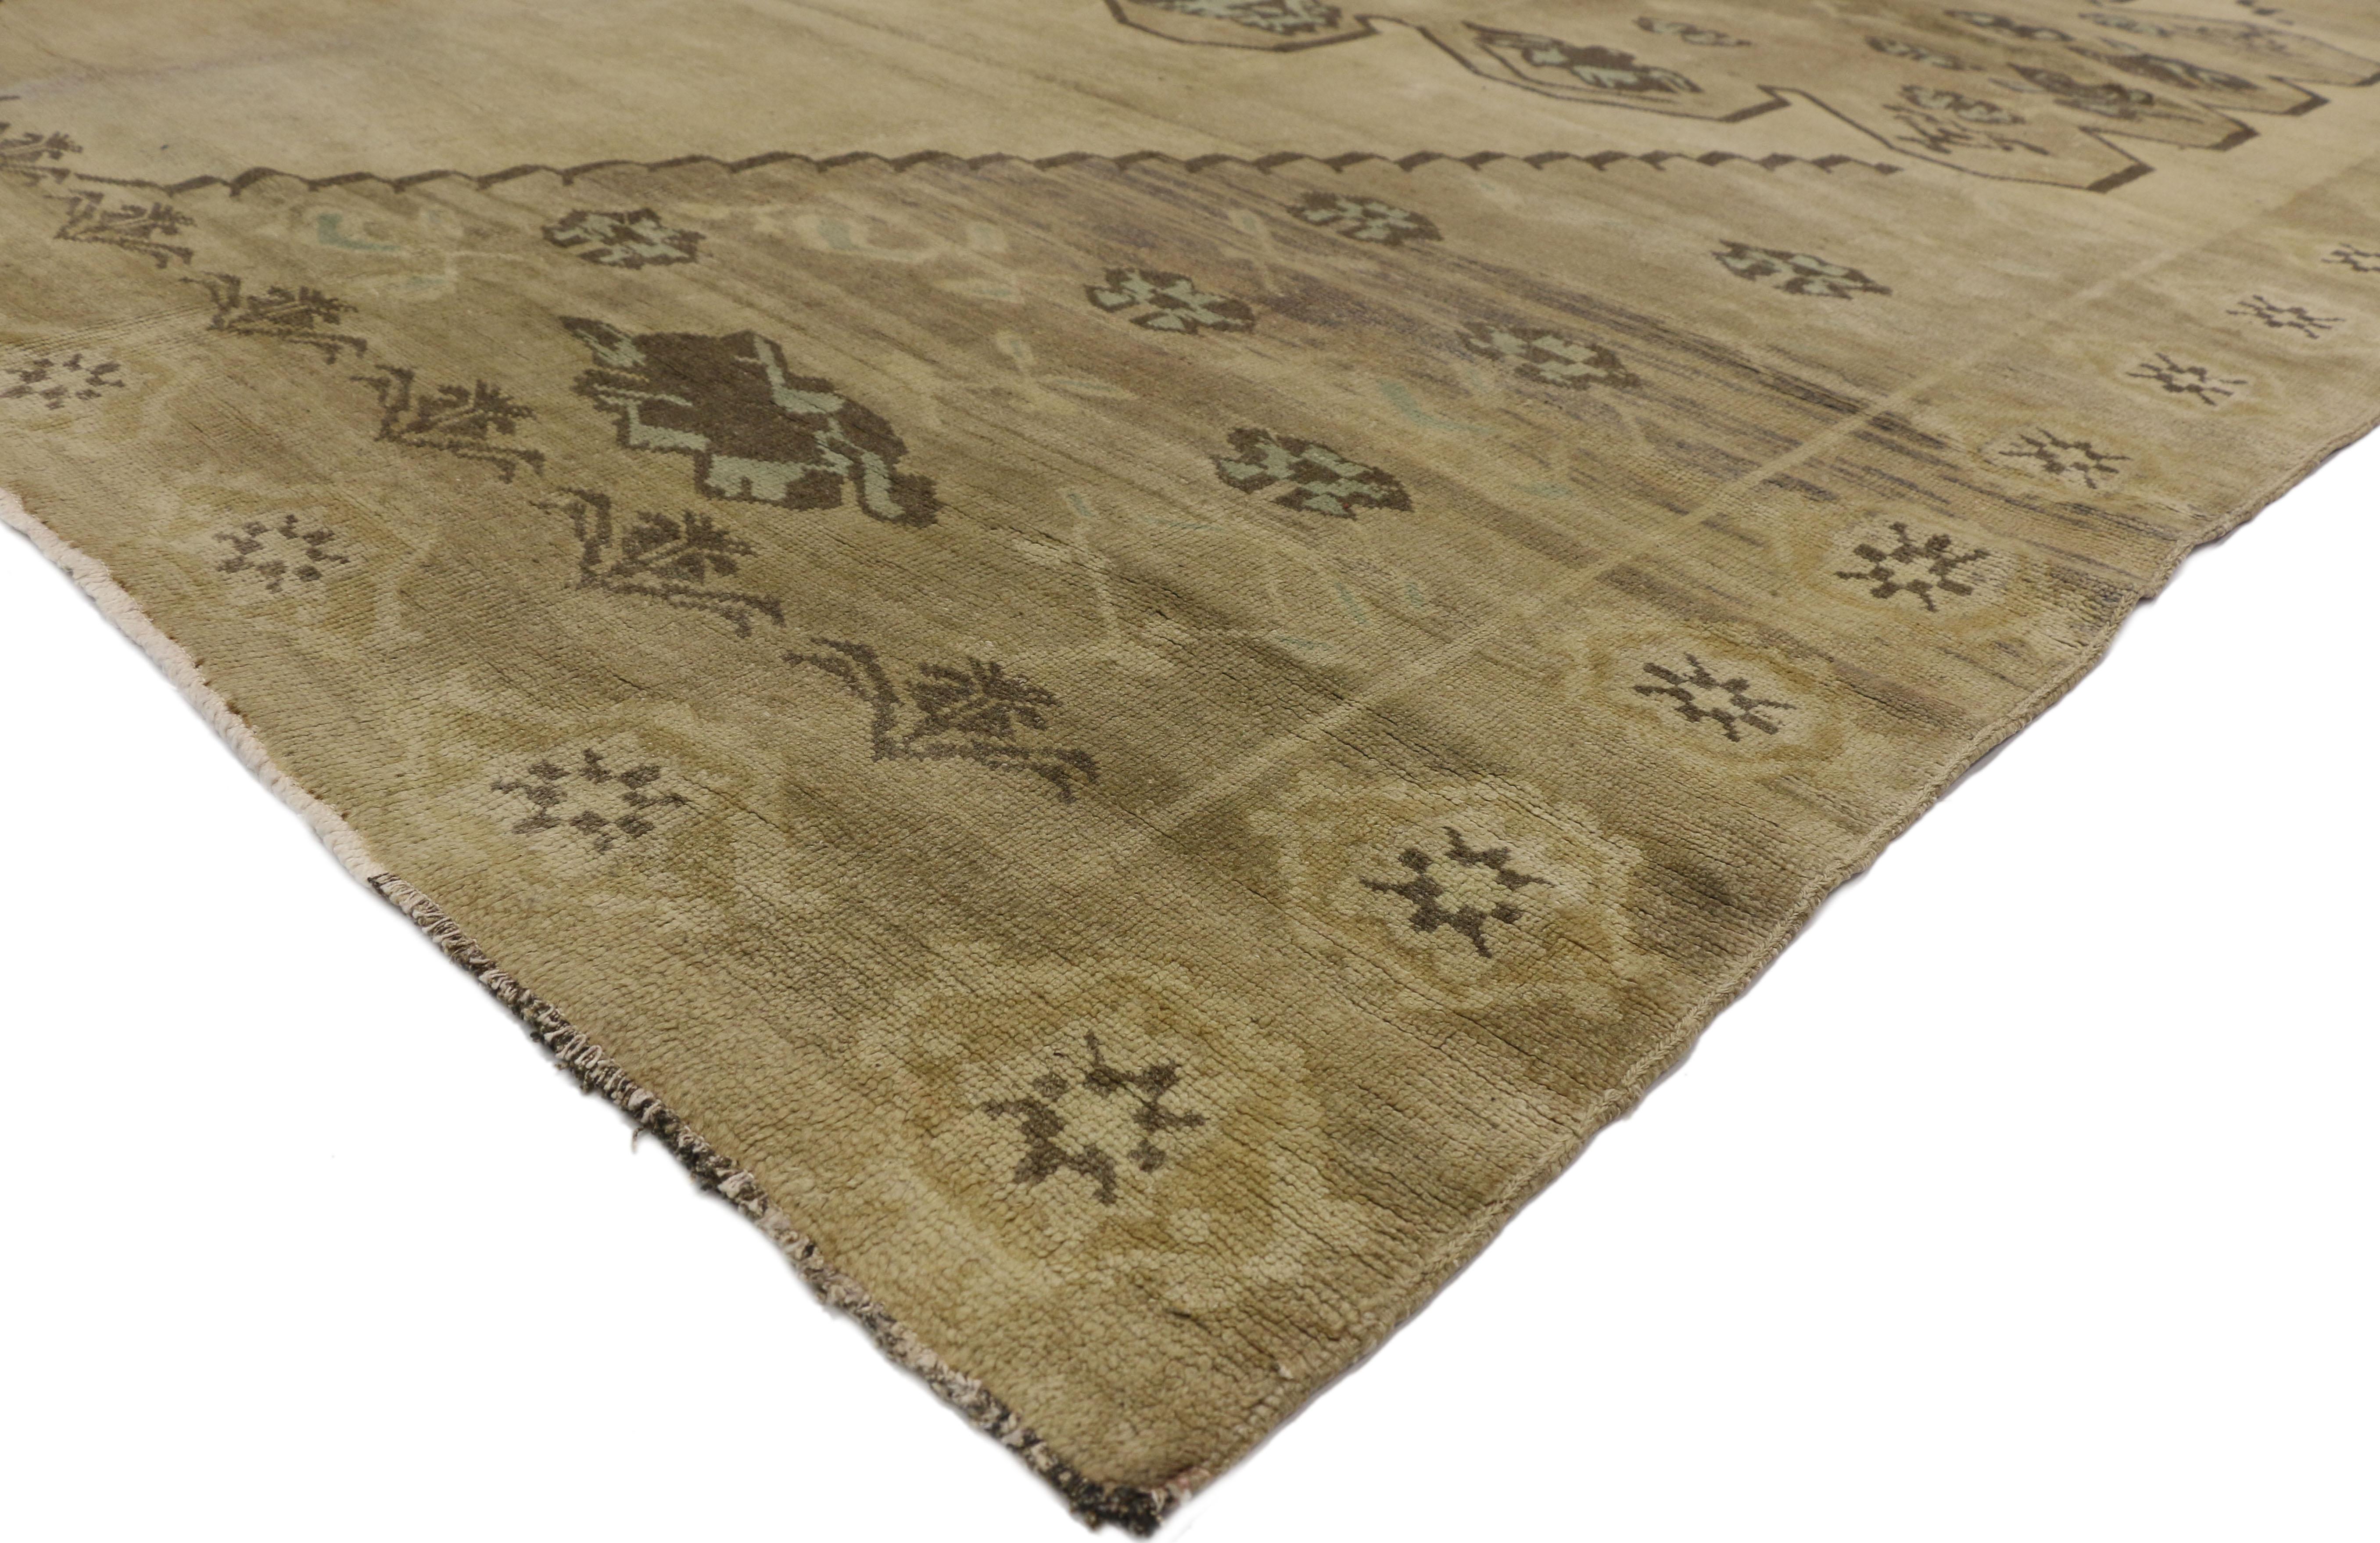 51372 Vintage Turkish Oushak Rug with Mid-Century Modern Style 10'05 x 12'10. Effortless beauty and simplicity meet soft, bespoke vibes with Mid-Century Modern style in this hand-knotted wool vintage Turkish Oushak rug. The abrashed field features a